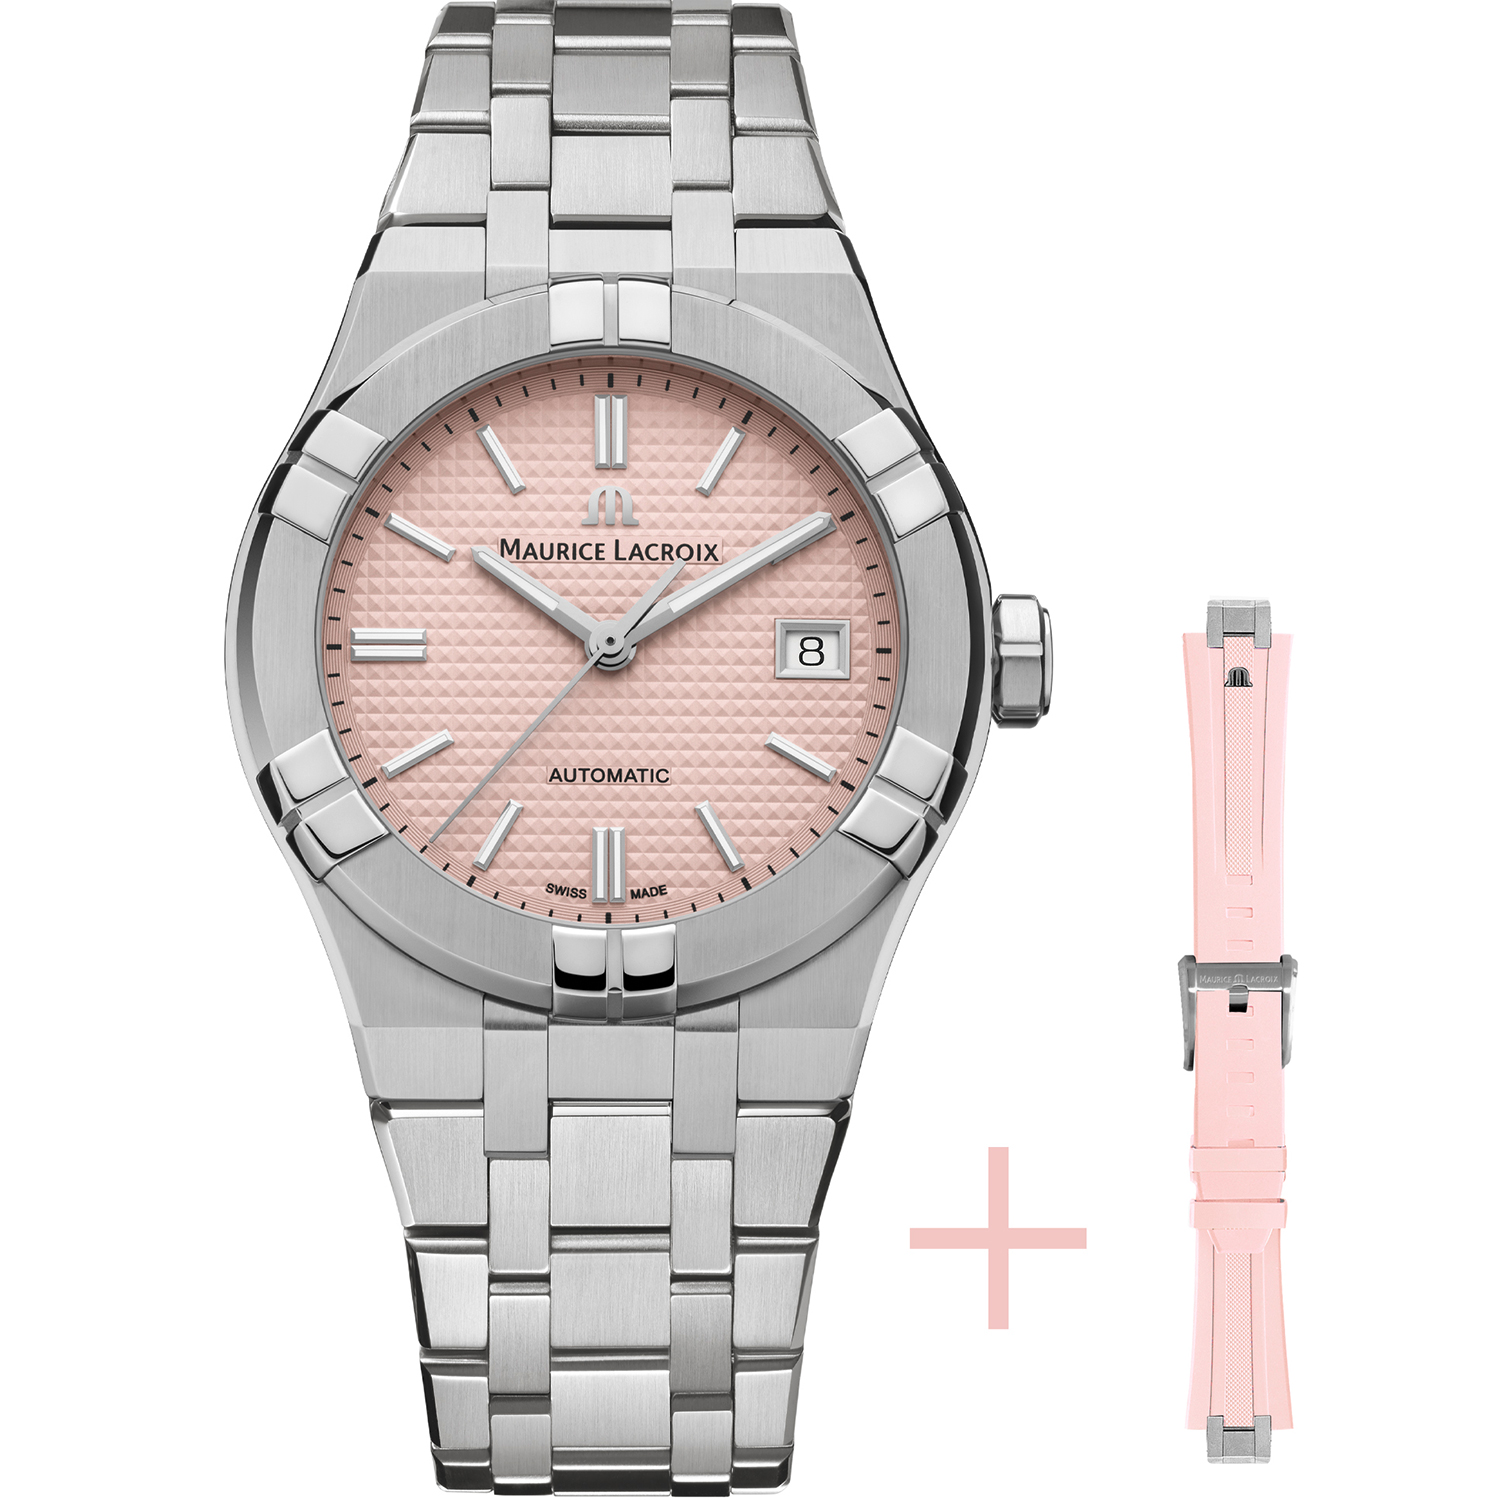 Maurice Lacroix Aikon Limited Edition Pink Set